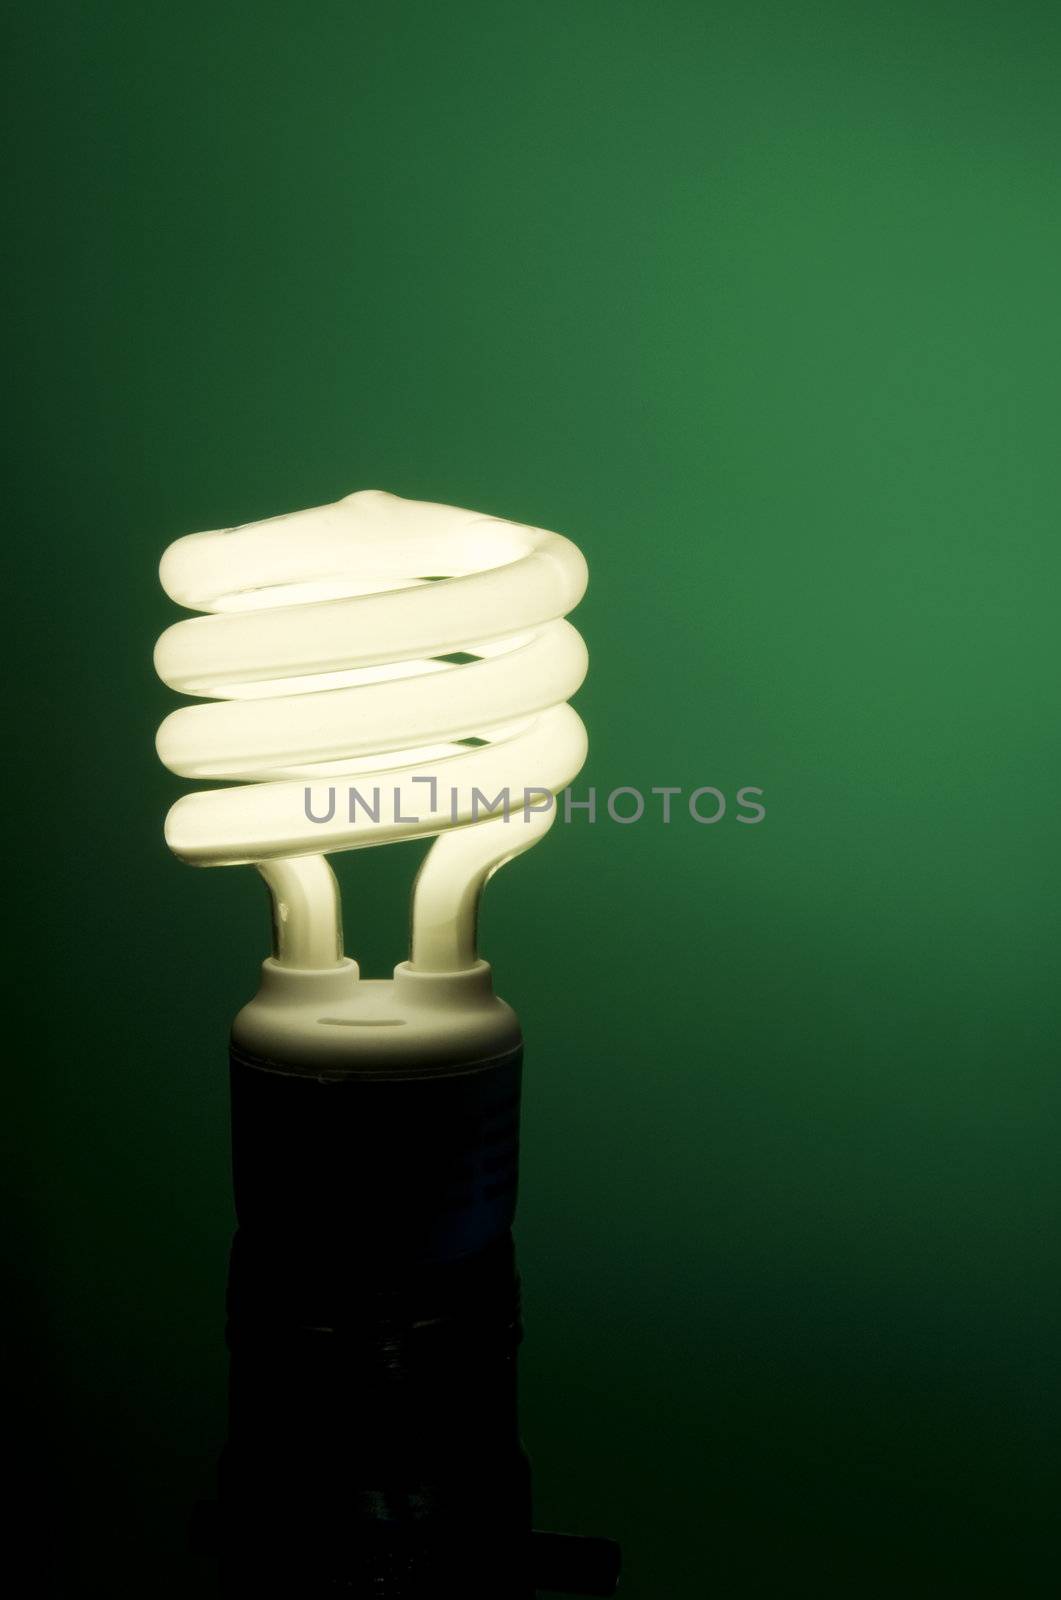 Vertical image of fluorescent light on green background